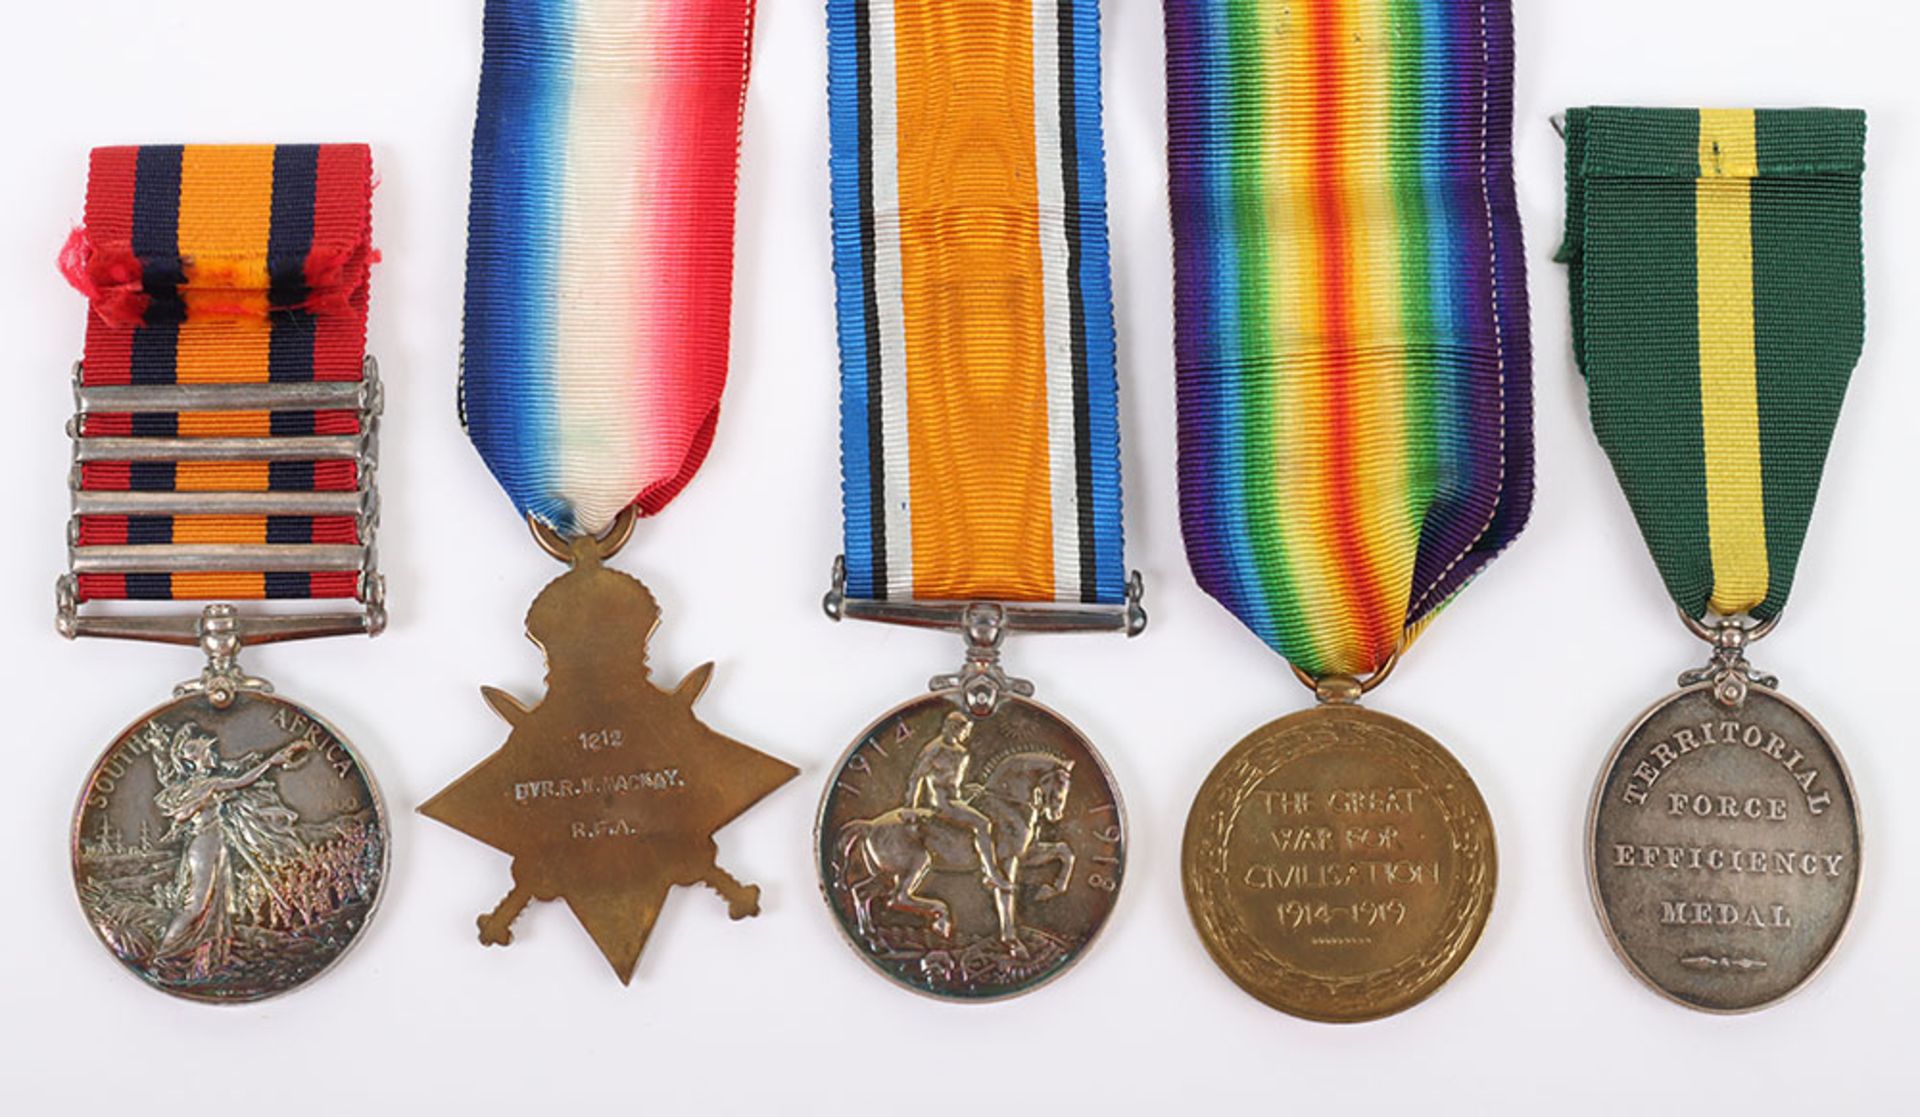 An Interesting Three Monarch Territorial Long Service Medal Group of Five to a Soldier Who Served in - Image 10 of 13